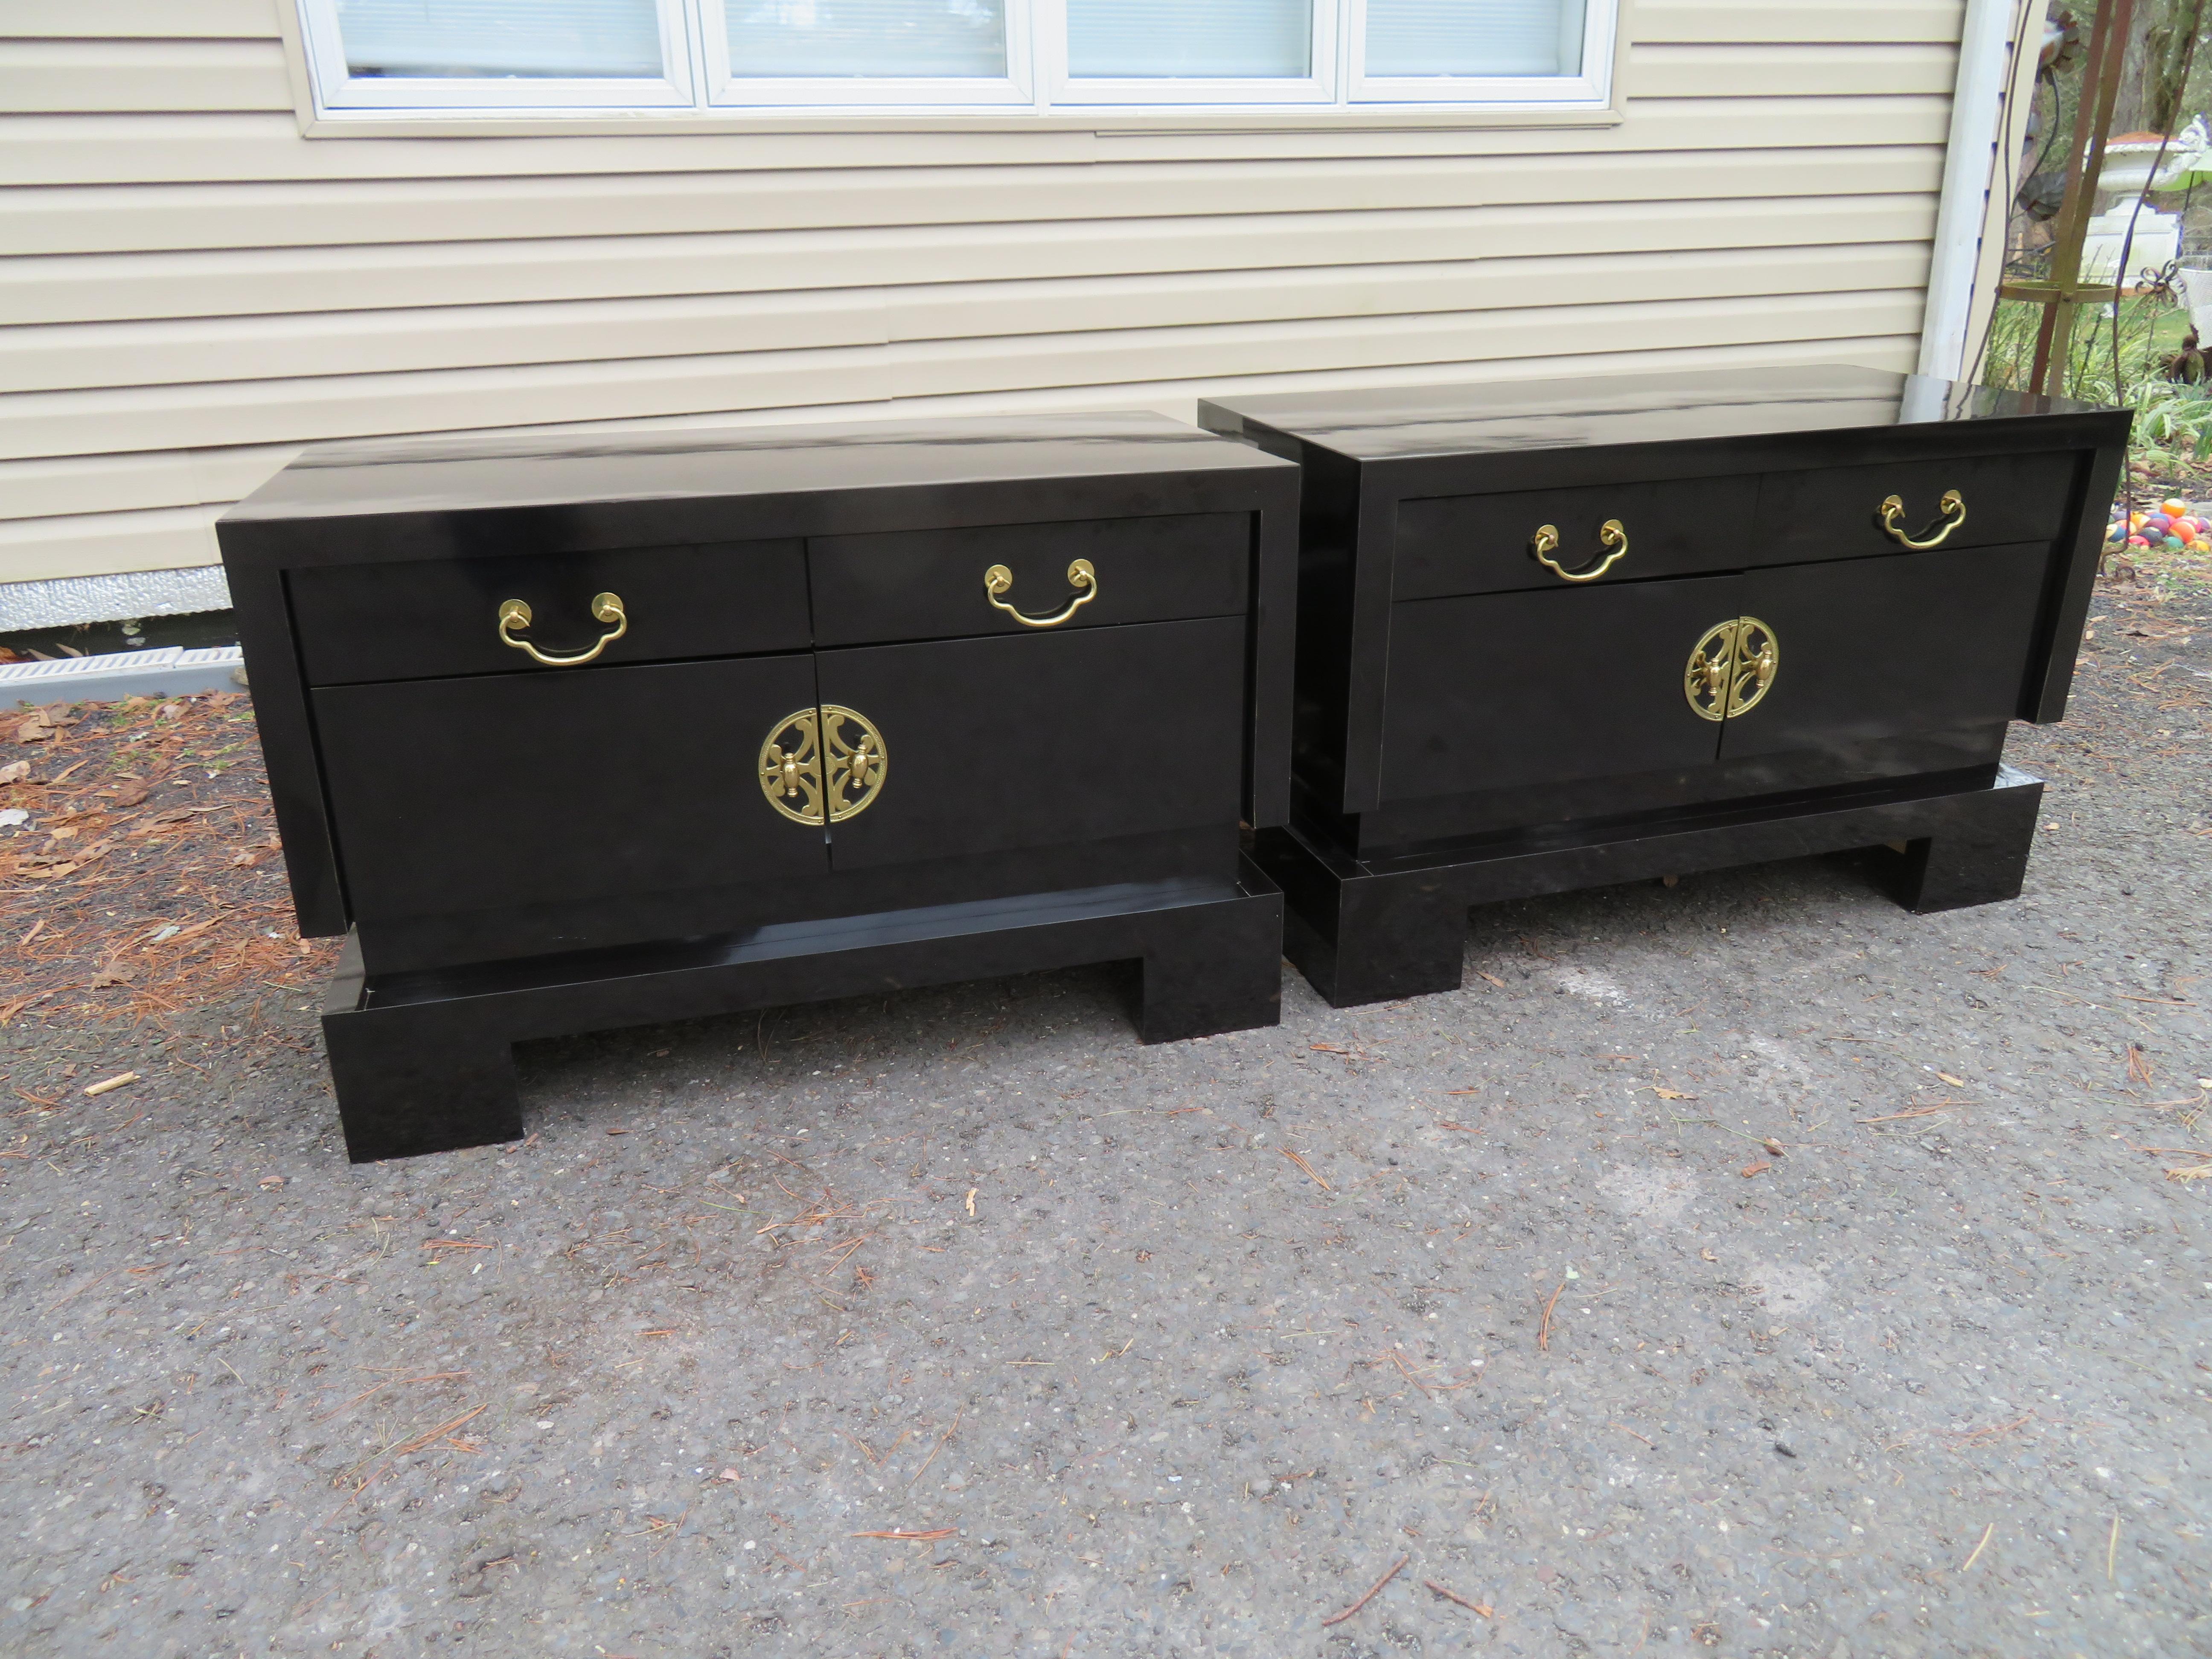 Magnificent pair of glossy black Chinoiserie nightstands. We love that these are veneered in black glossy Formica and are in great vintage condition. They measure 23